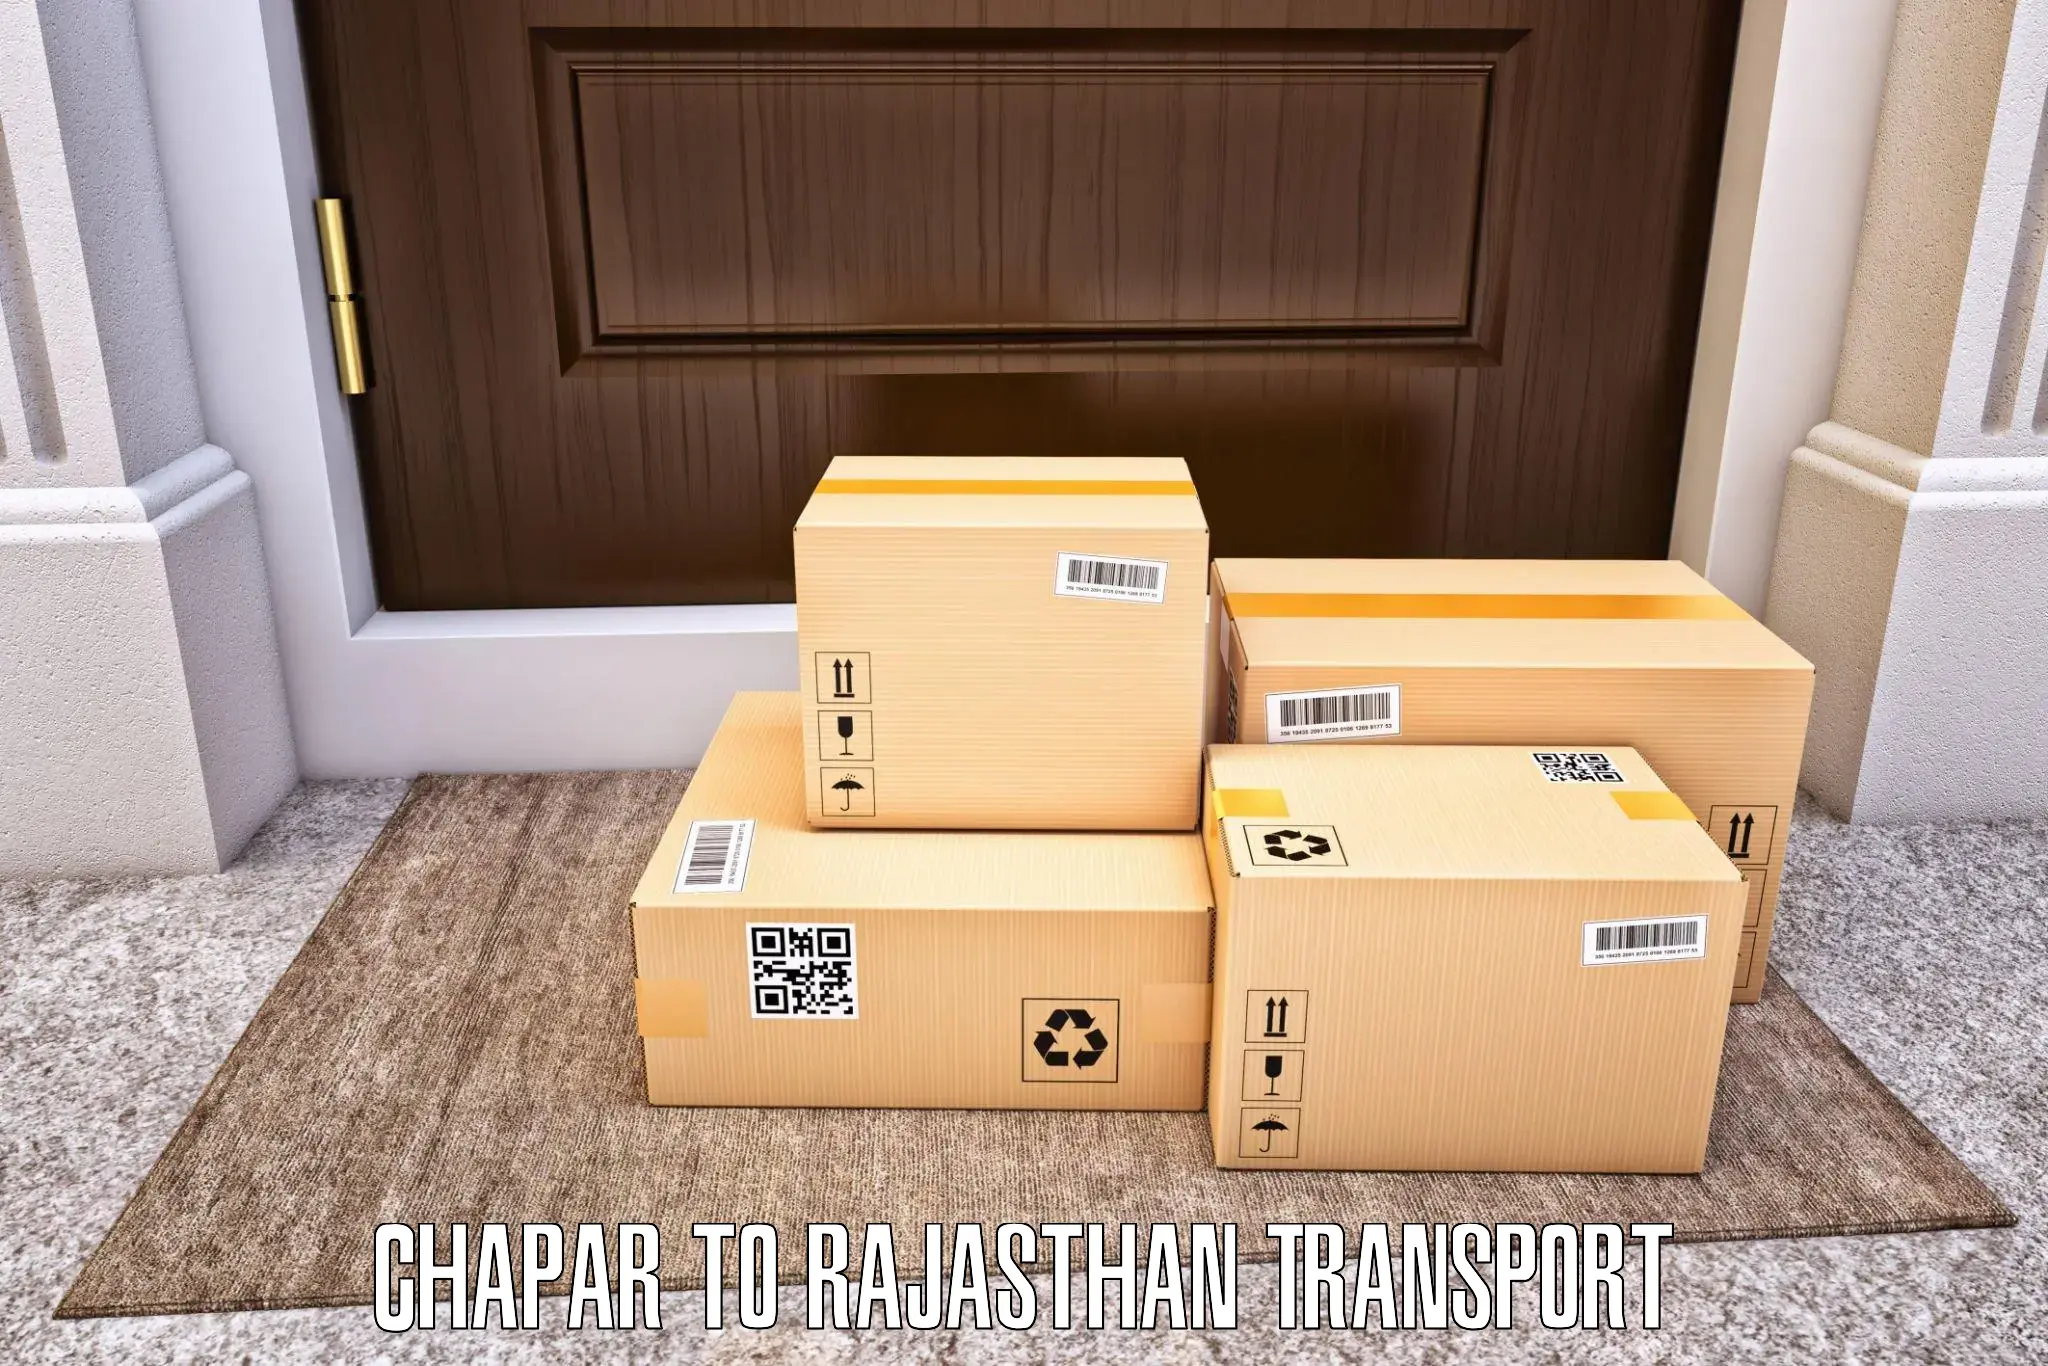 Nearby transport service Chapar to Sultana